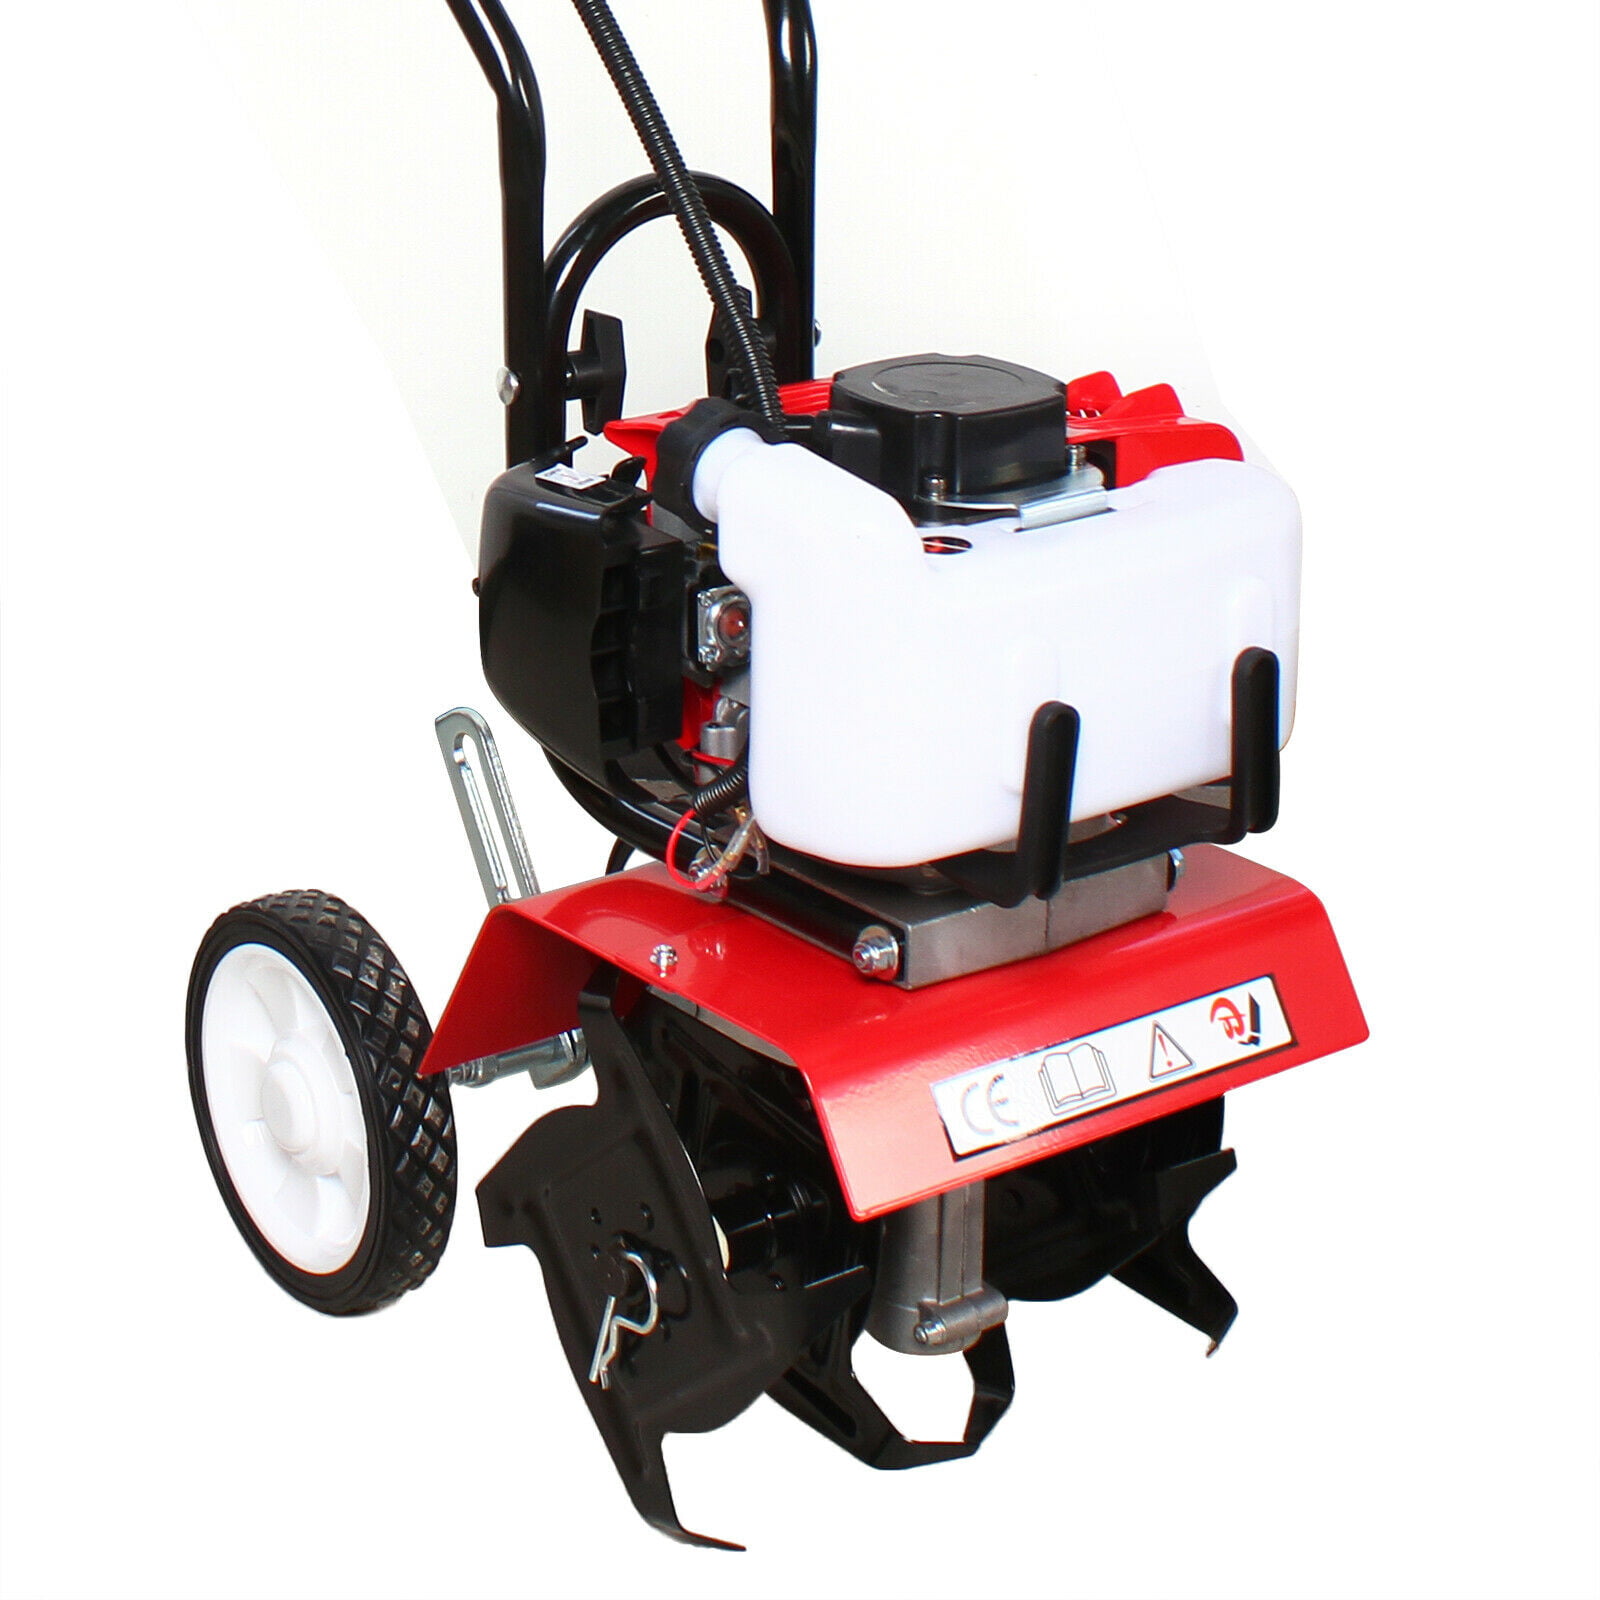 CNCEST 52cc 2HP Petrol Gas Powered Commercial Mini Garden Tiller 12 Wide 2-Stroke Engine Cultivator Air Cooled 4 Teeth with 4 Blades with 2 Wheels 